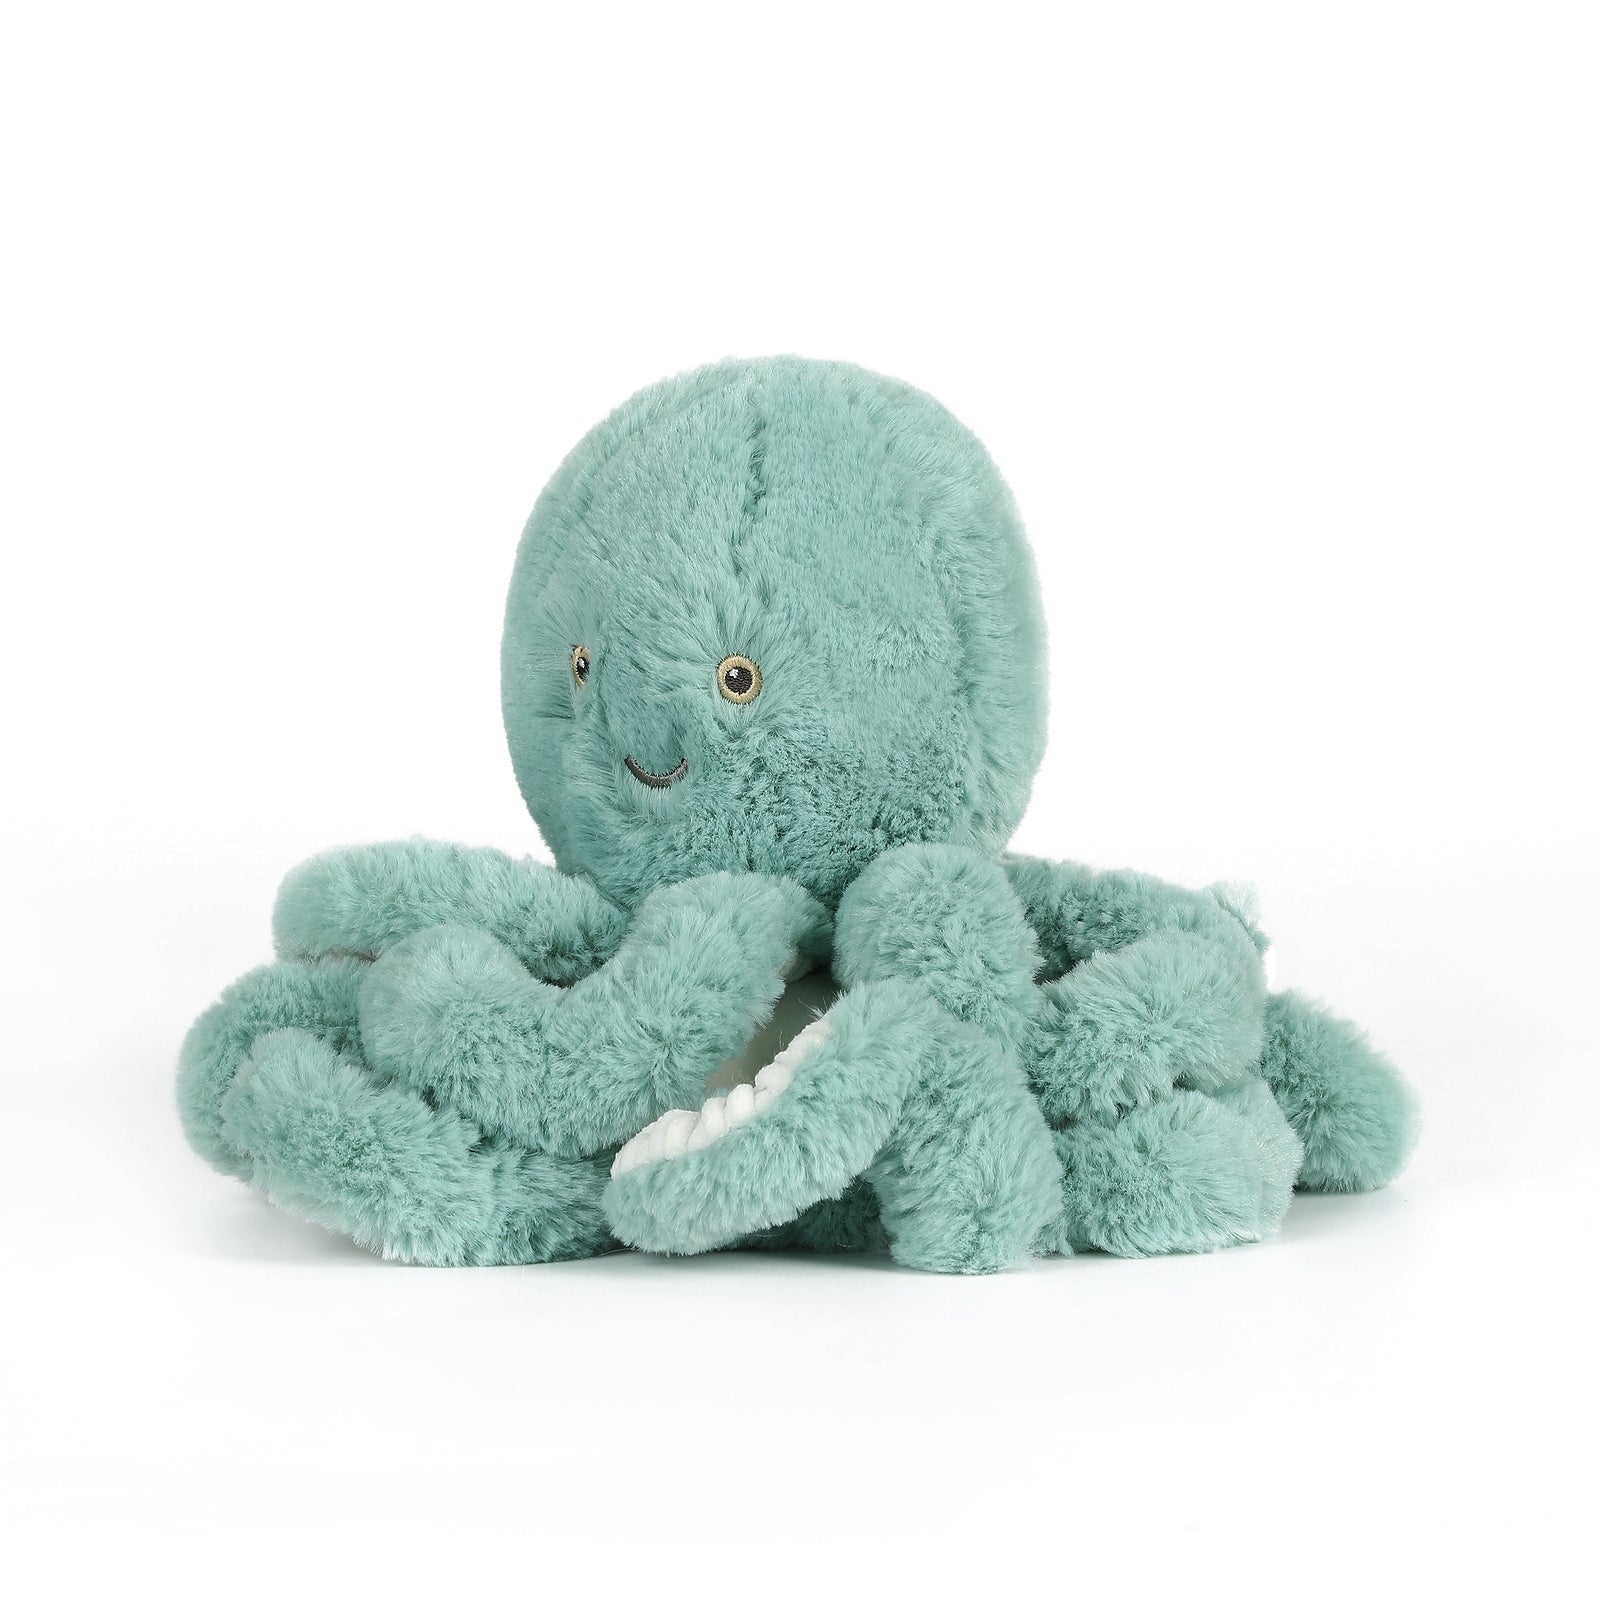 Designed by OB in Australia, these sea creature toys are a great snuggly friend for your little ones and their adventures.